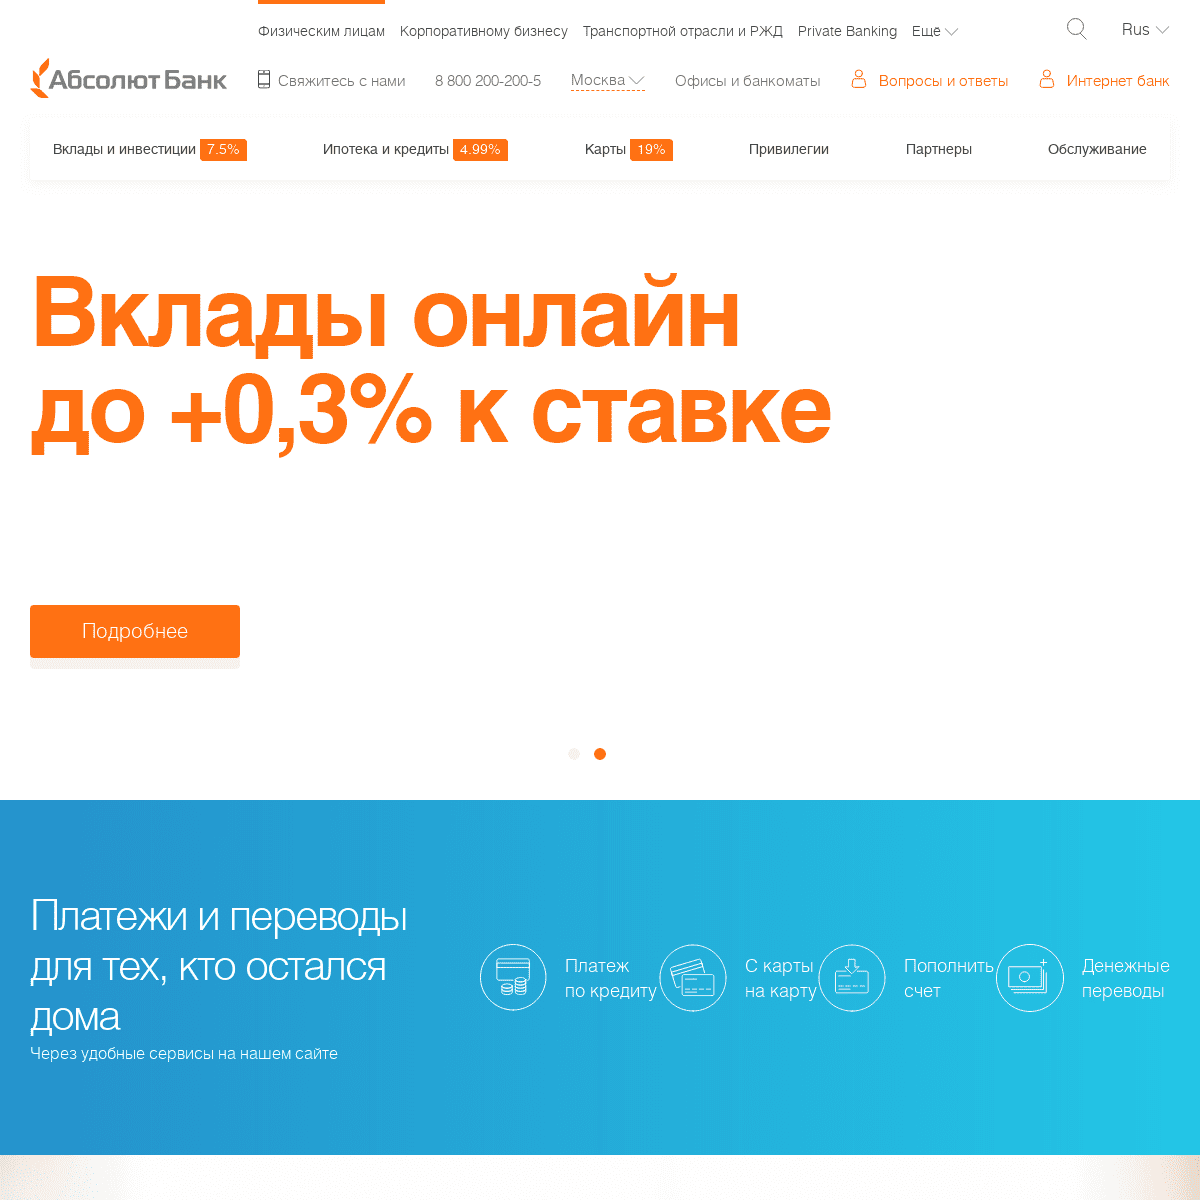 A complete backup of absolutbank.ru